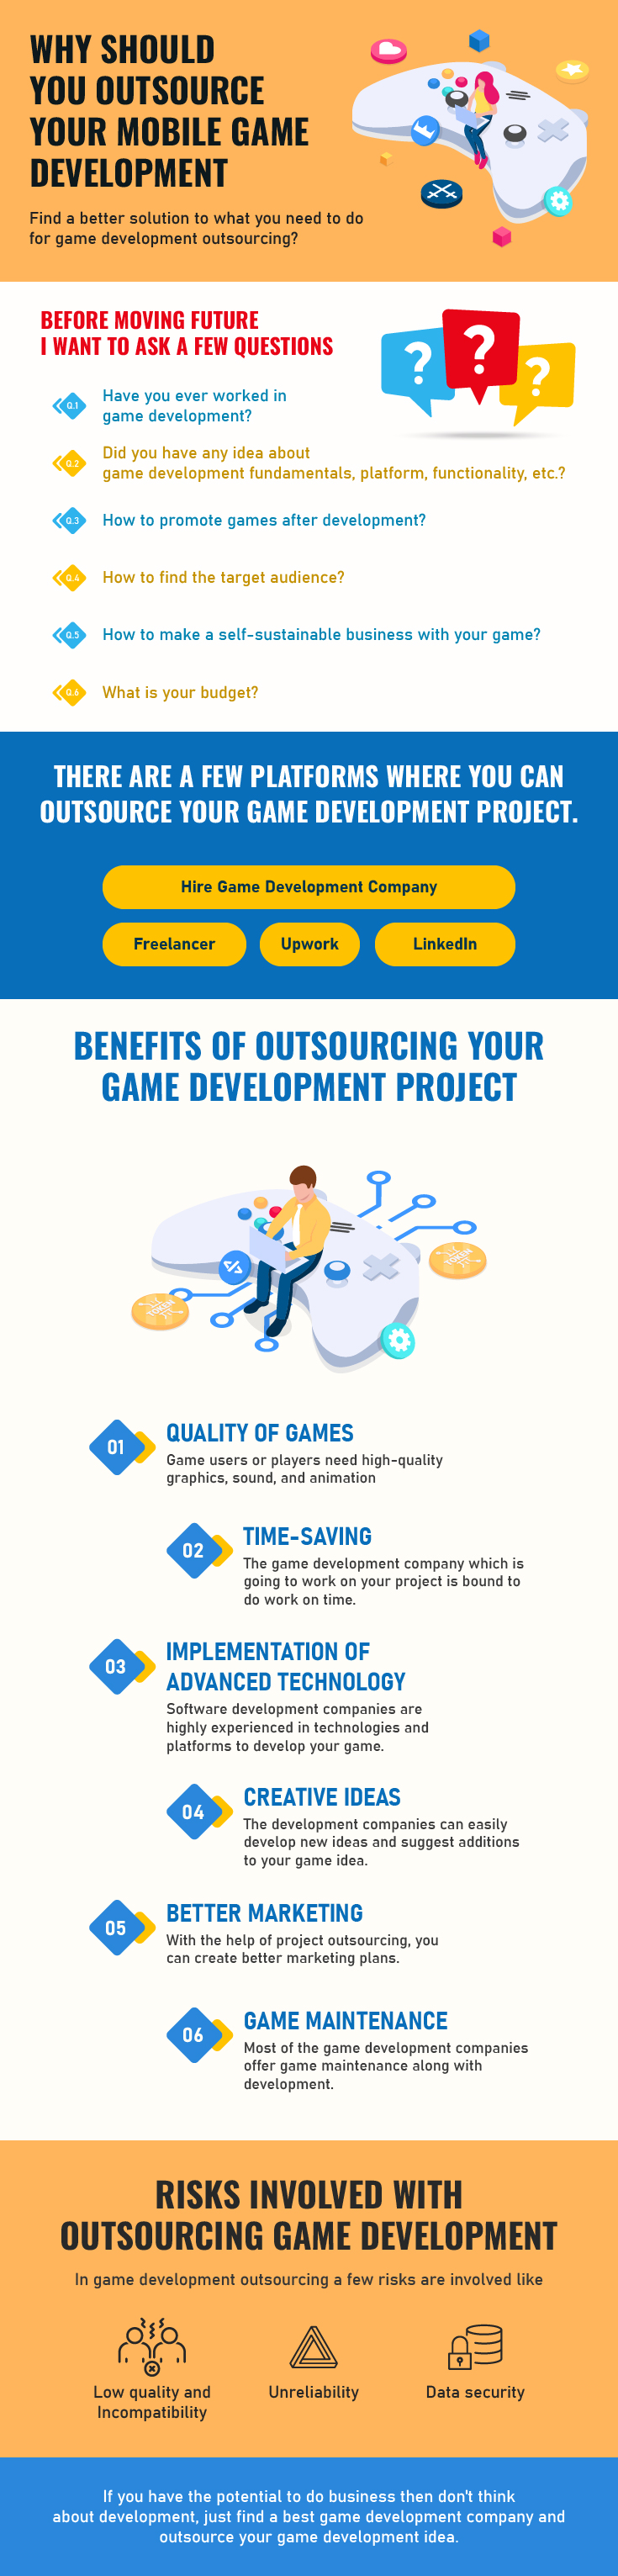 why should you outsource your mobile game development